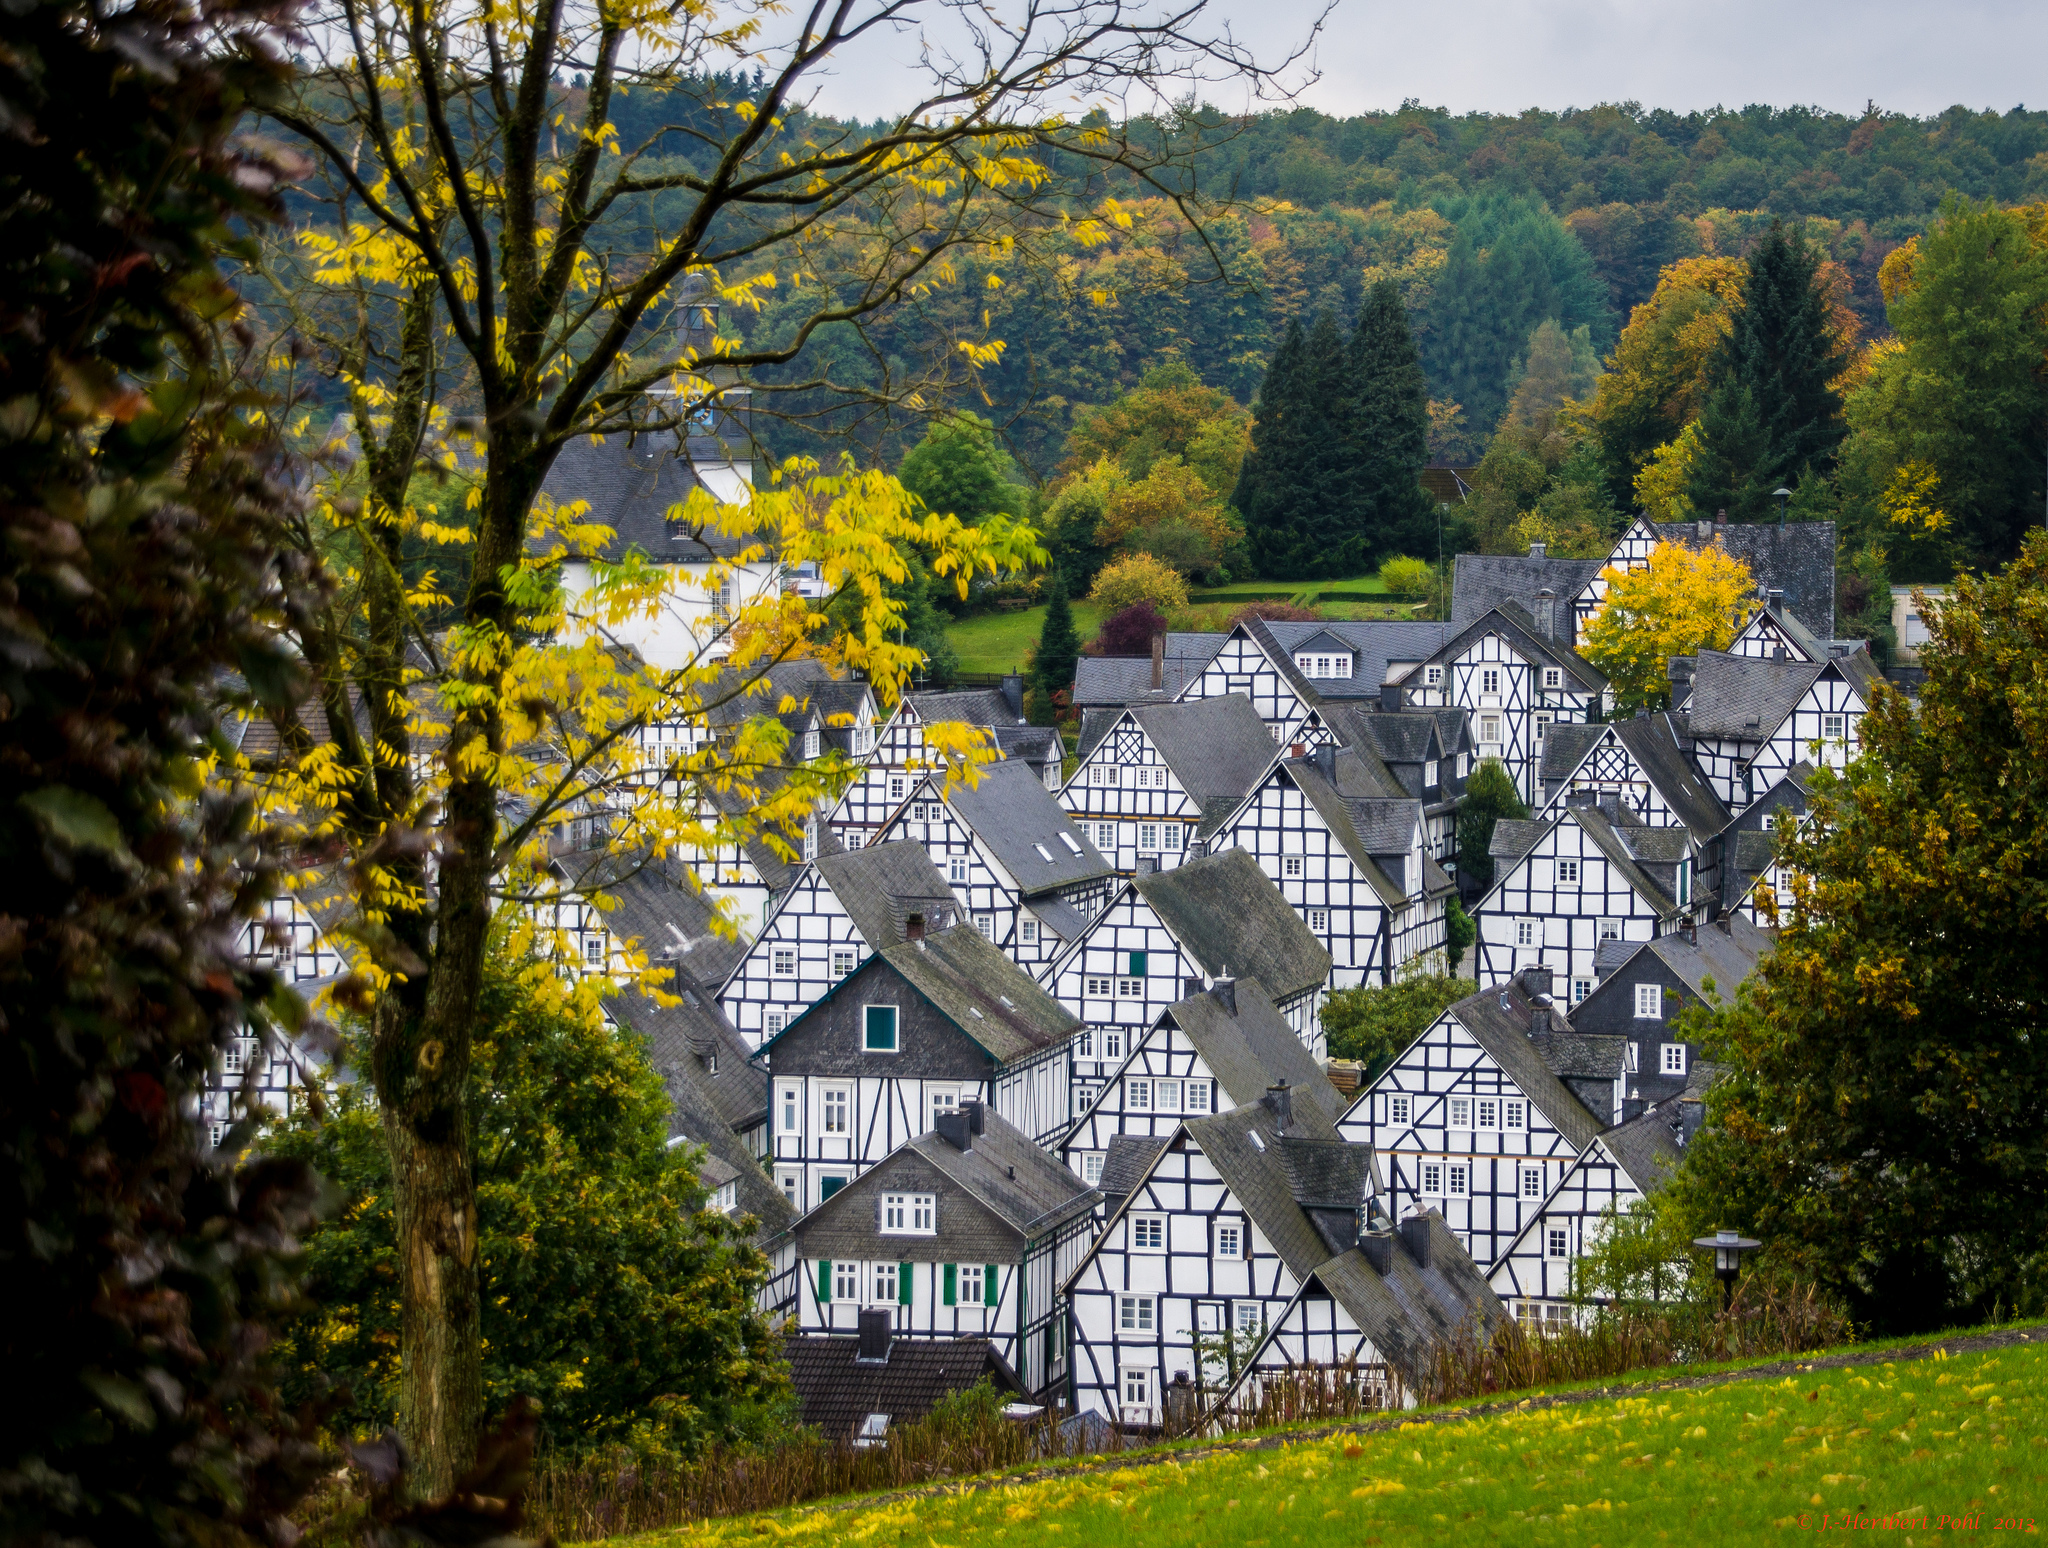 Freudenberg - Fairy Tale Medieval Town in Germany - YourAmazingPlaces.com